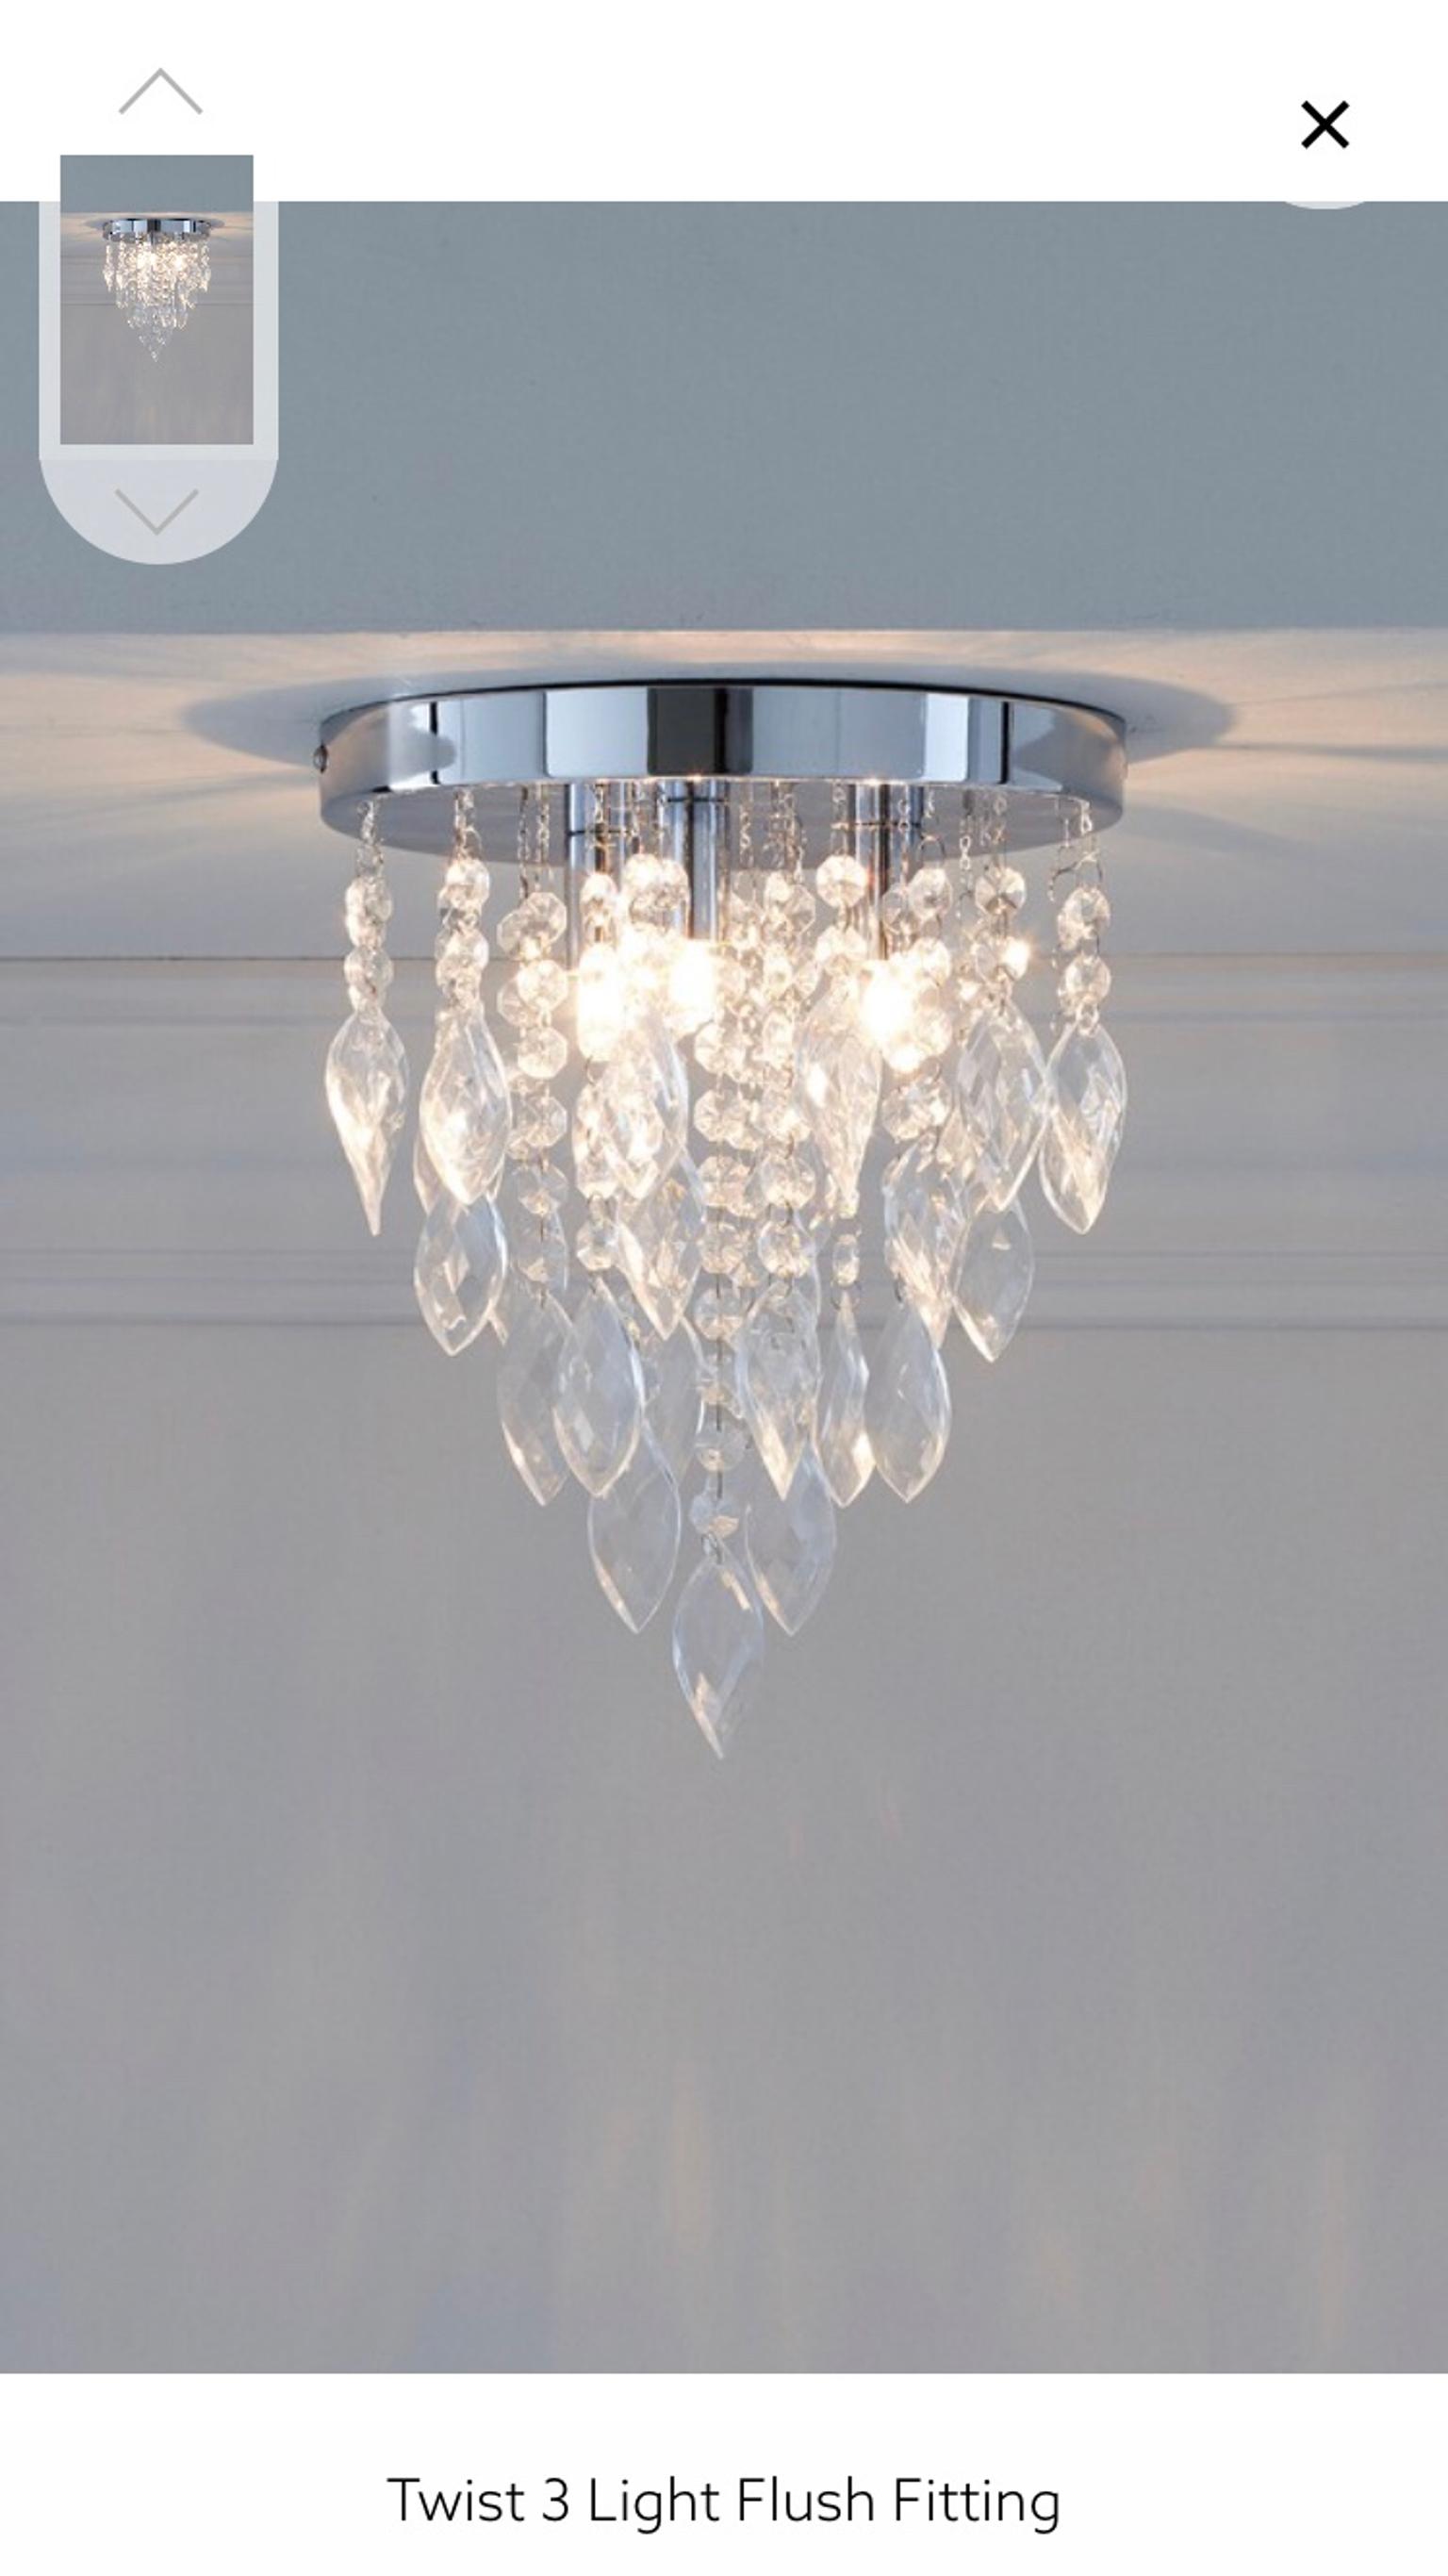 Next Flush Fitting Ceiling Light In L16 Liverpool For 20 00 For